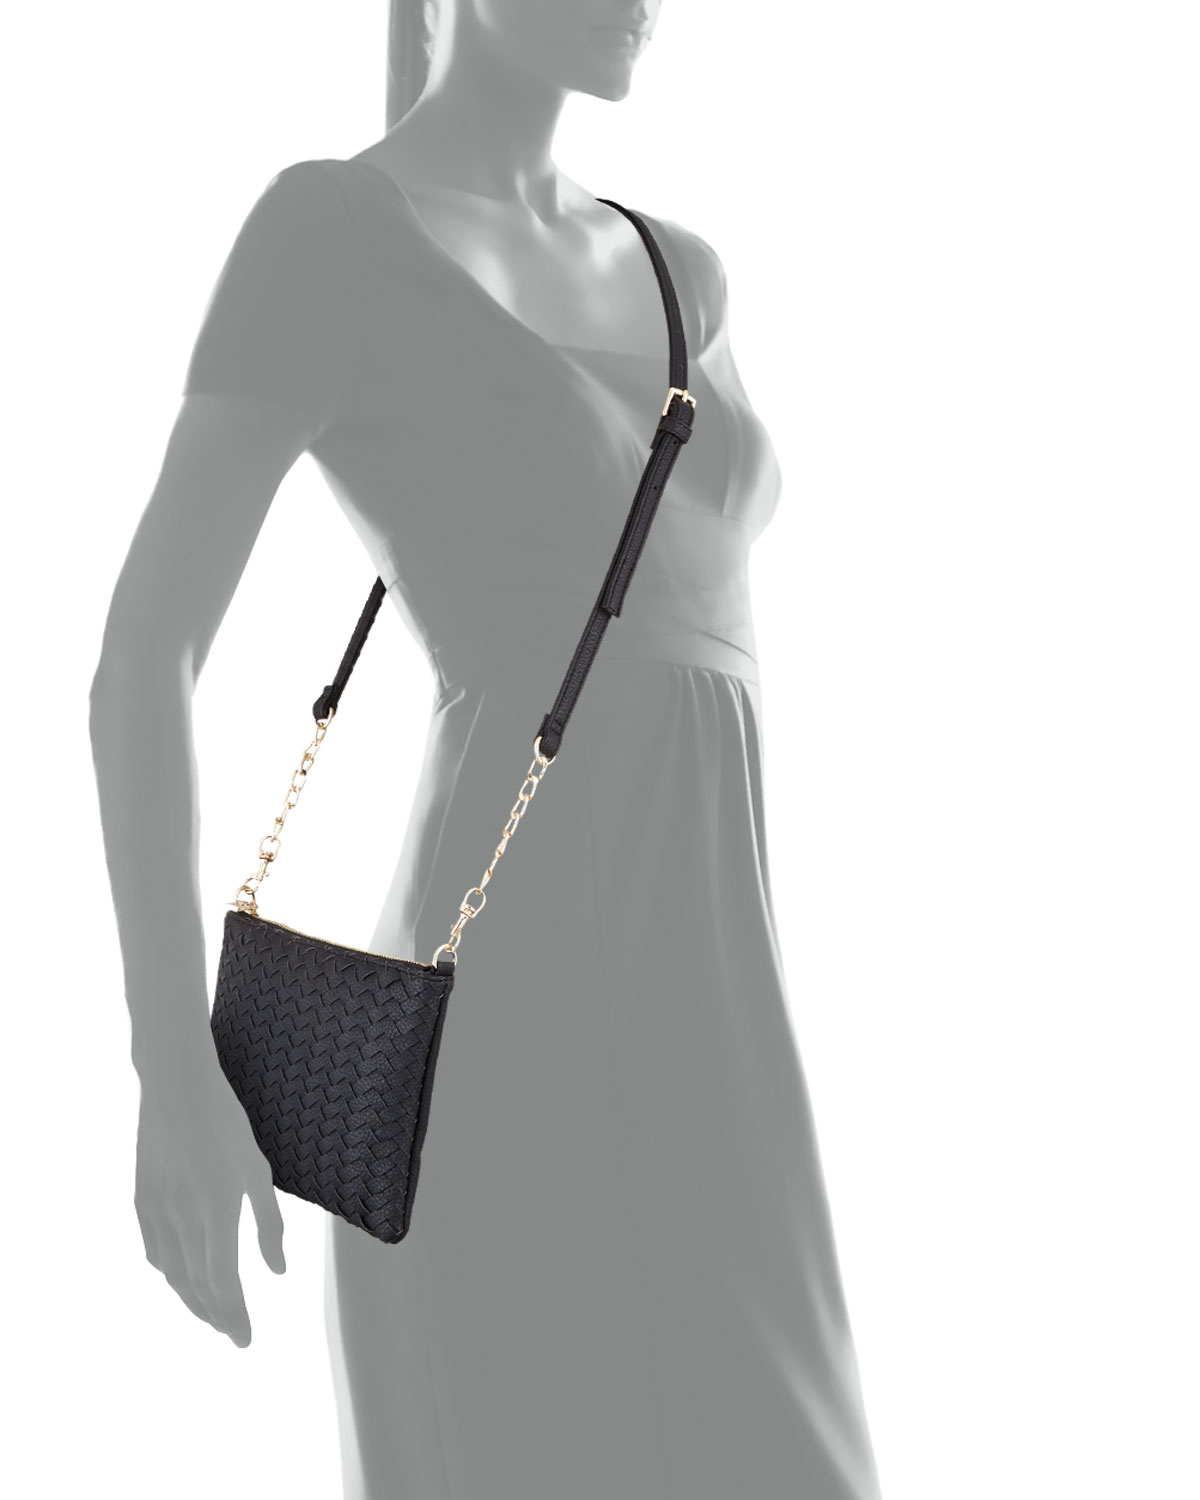 Neiman Marcus Woven Faux-leather Crossbody Bag in Black - Lyst